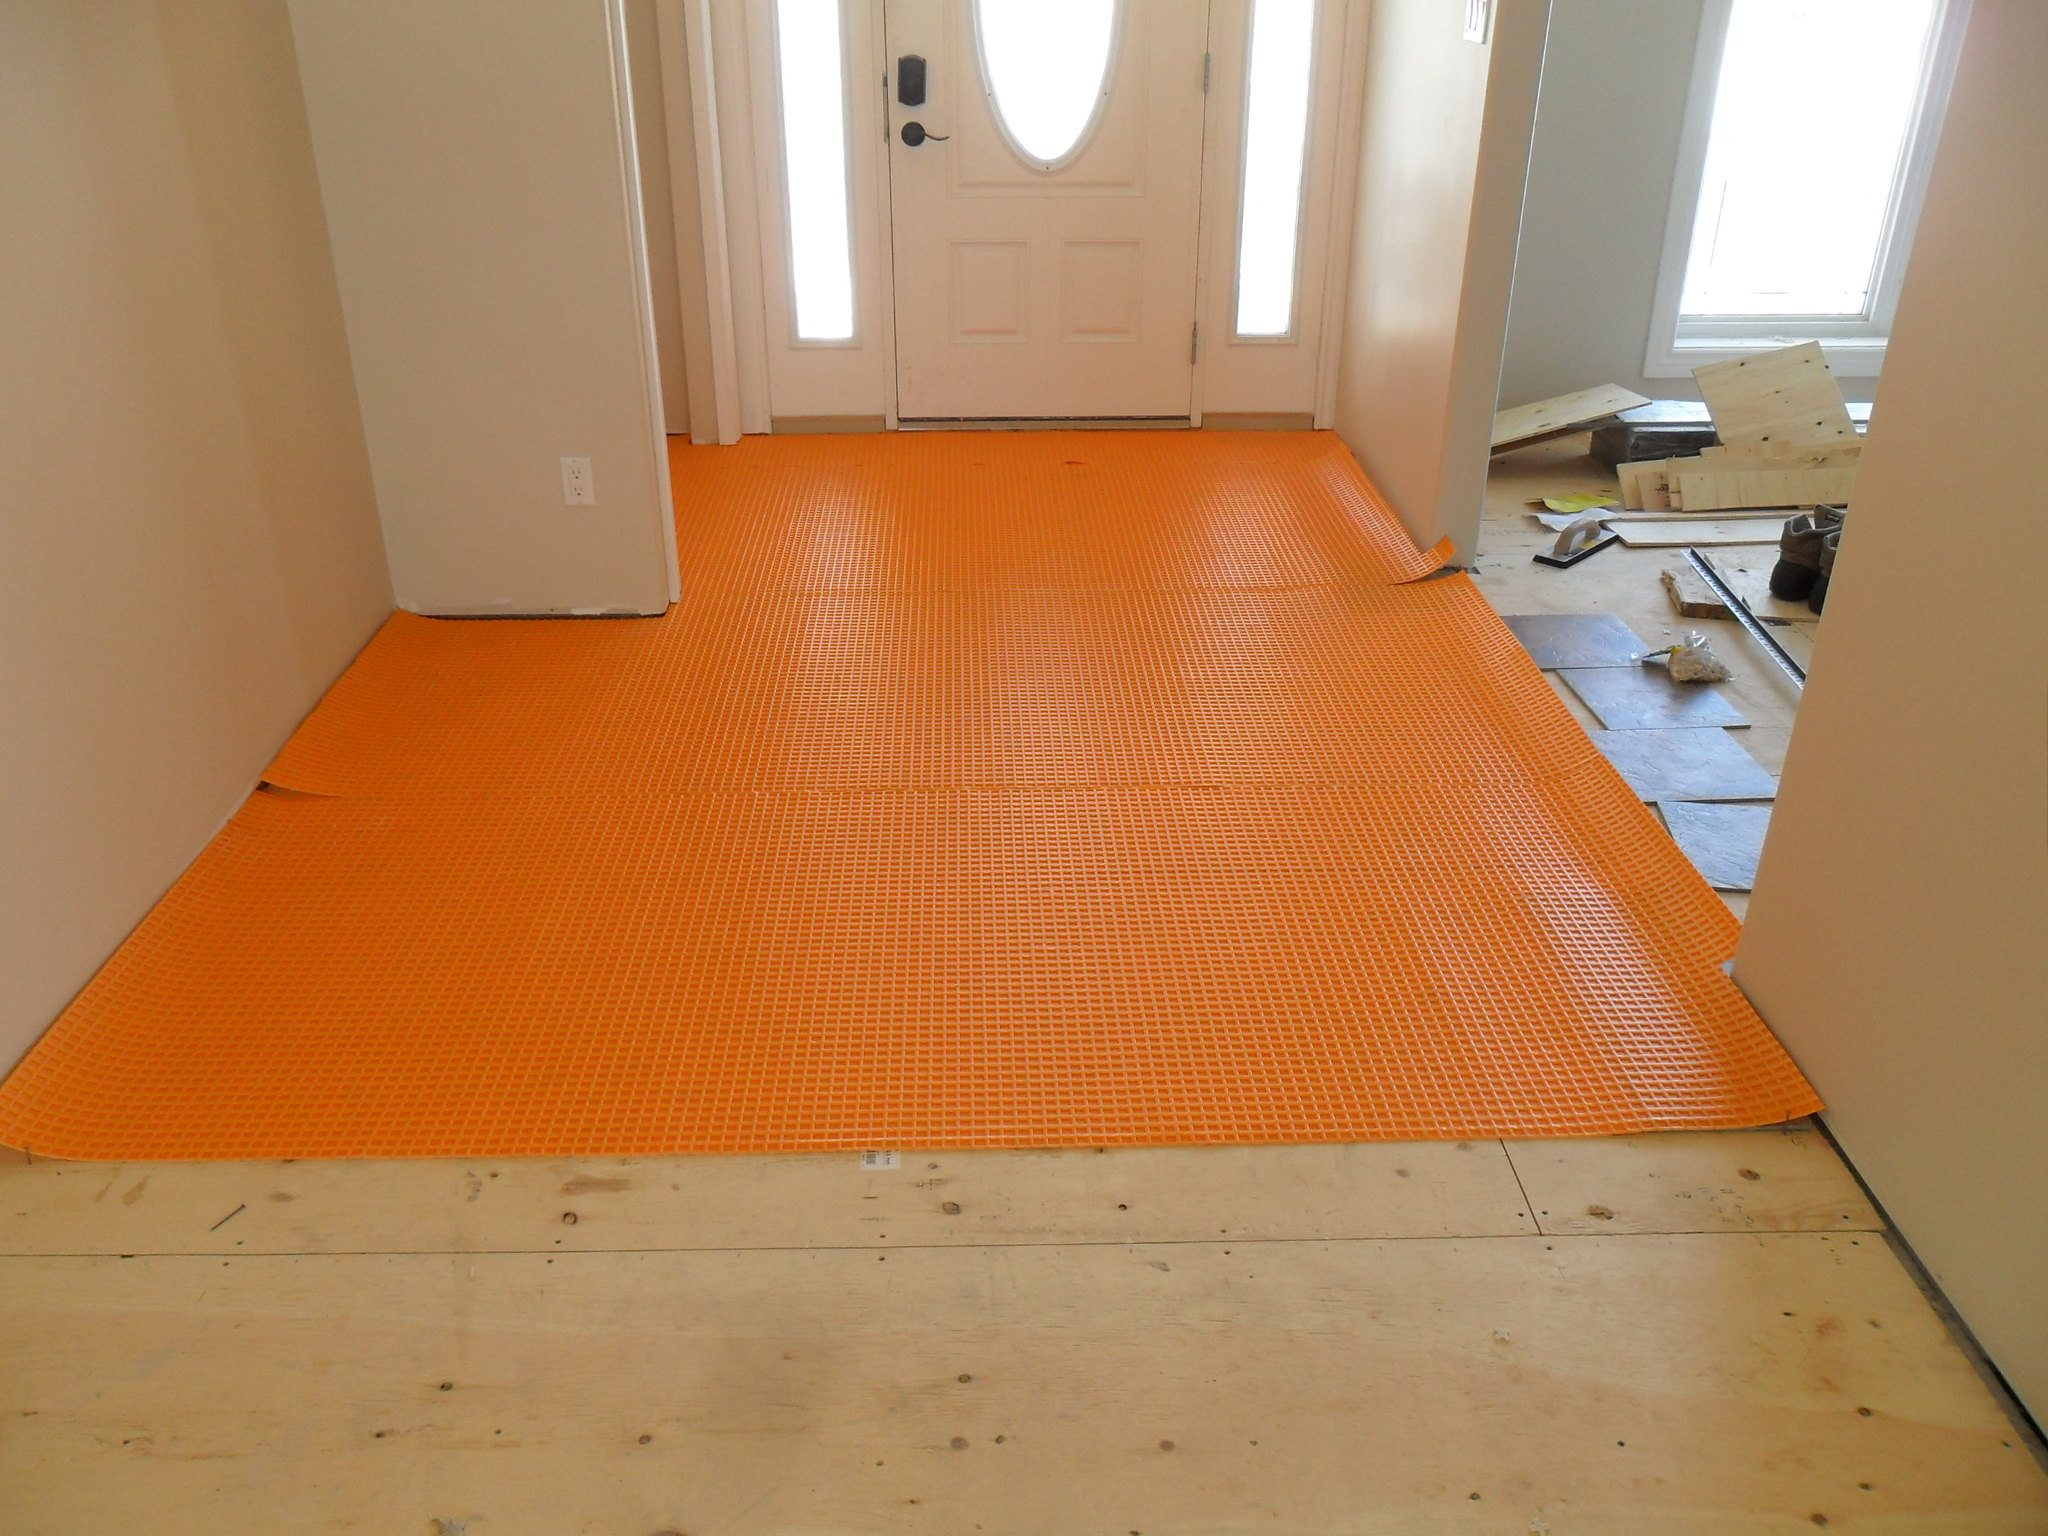 Ditra Over Plywood Theplywood Com, Can You Tile Over Plywood Floor